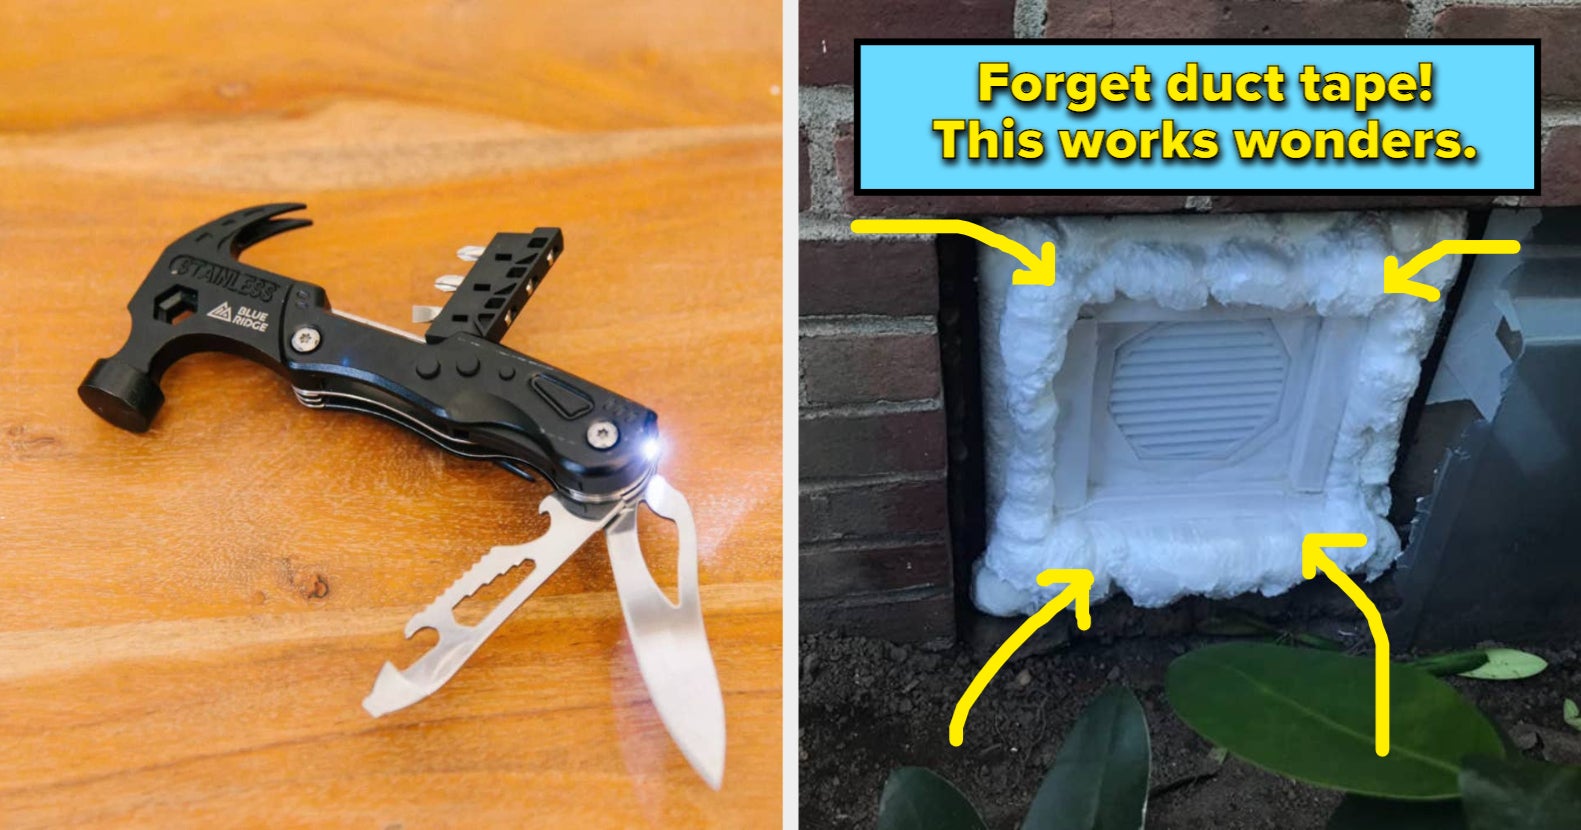 28 Items To Keep Handy At Home If You Fear Being Unprepared To Fix Things